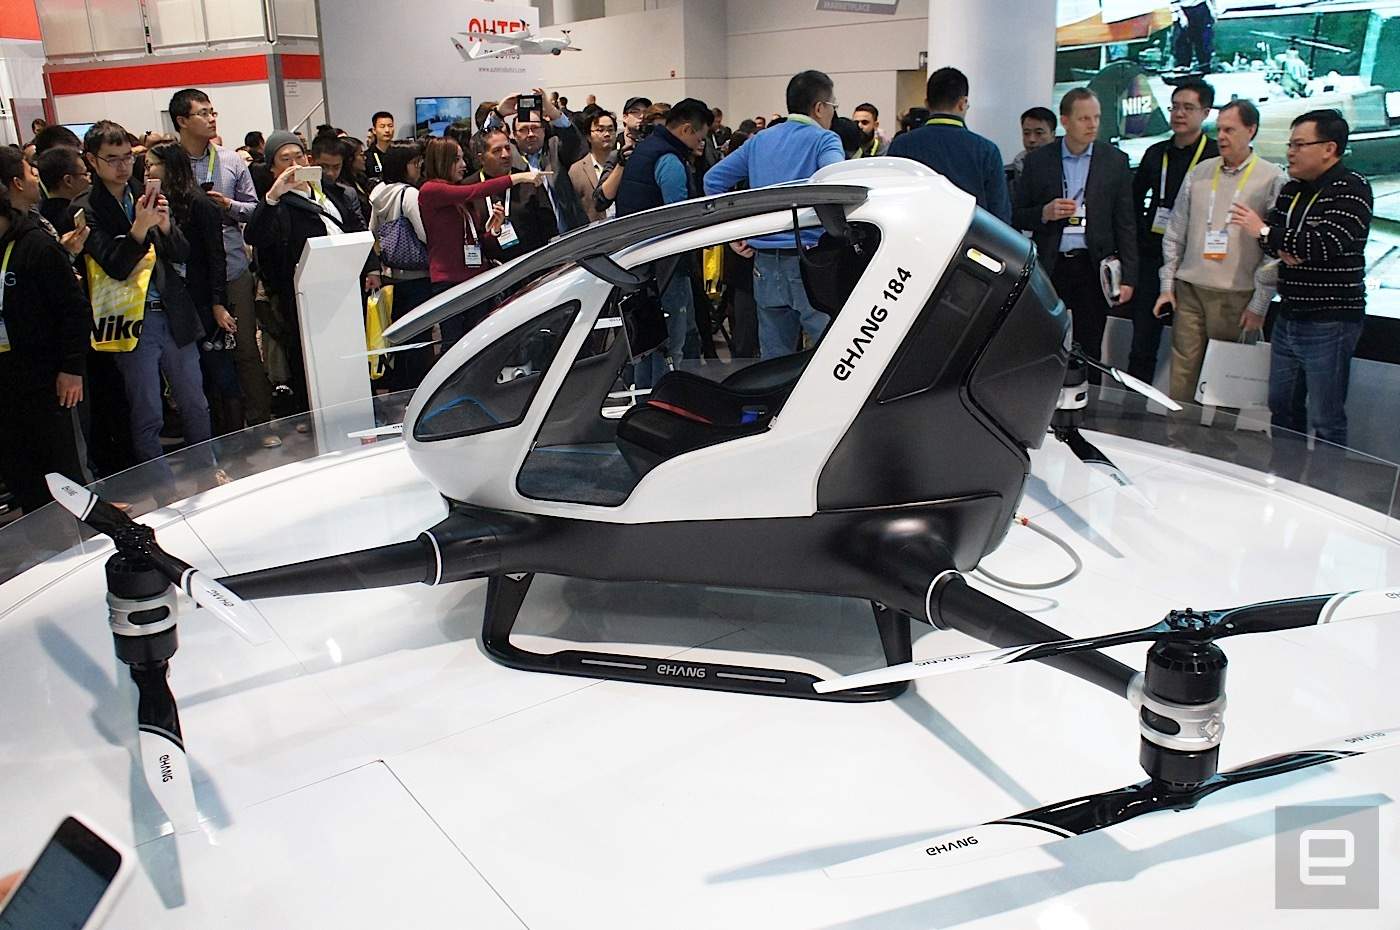 The $300,000 personal drone, for the hard to shop for 1-percenter in your life.